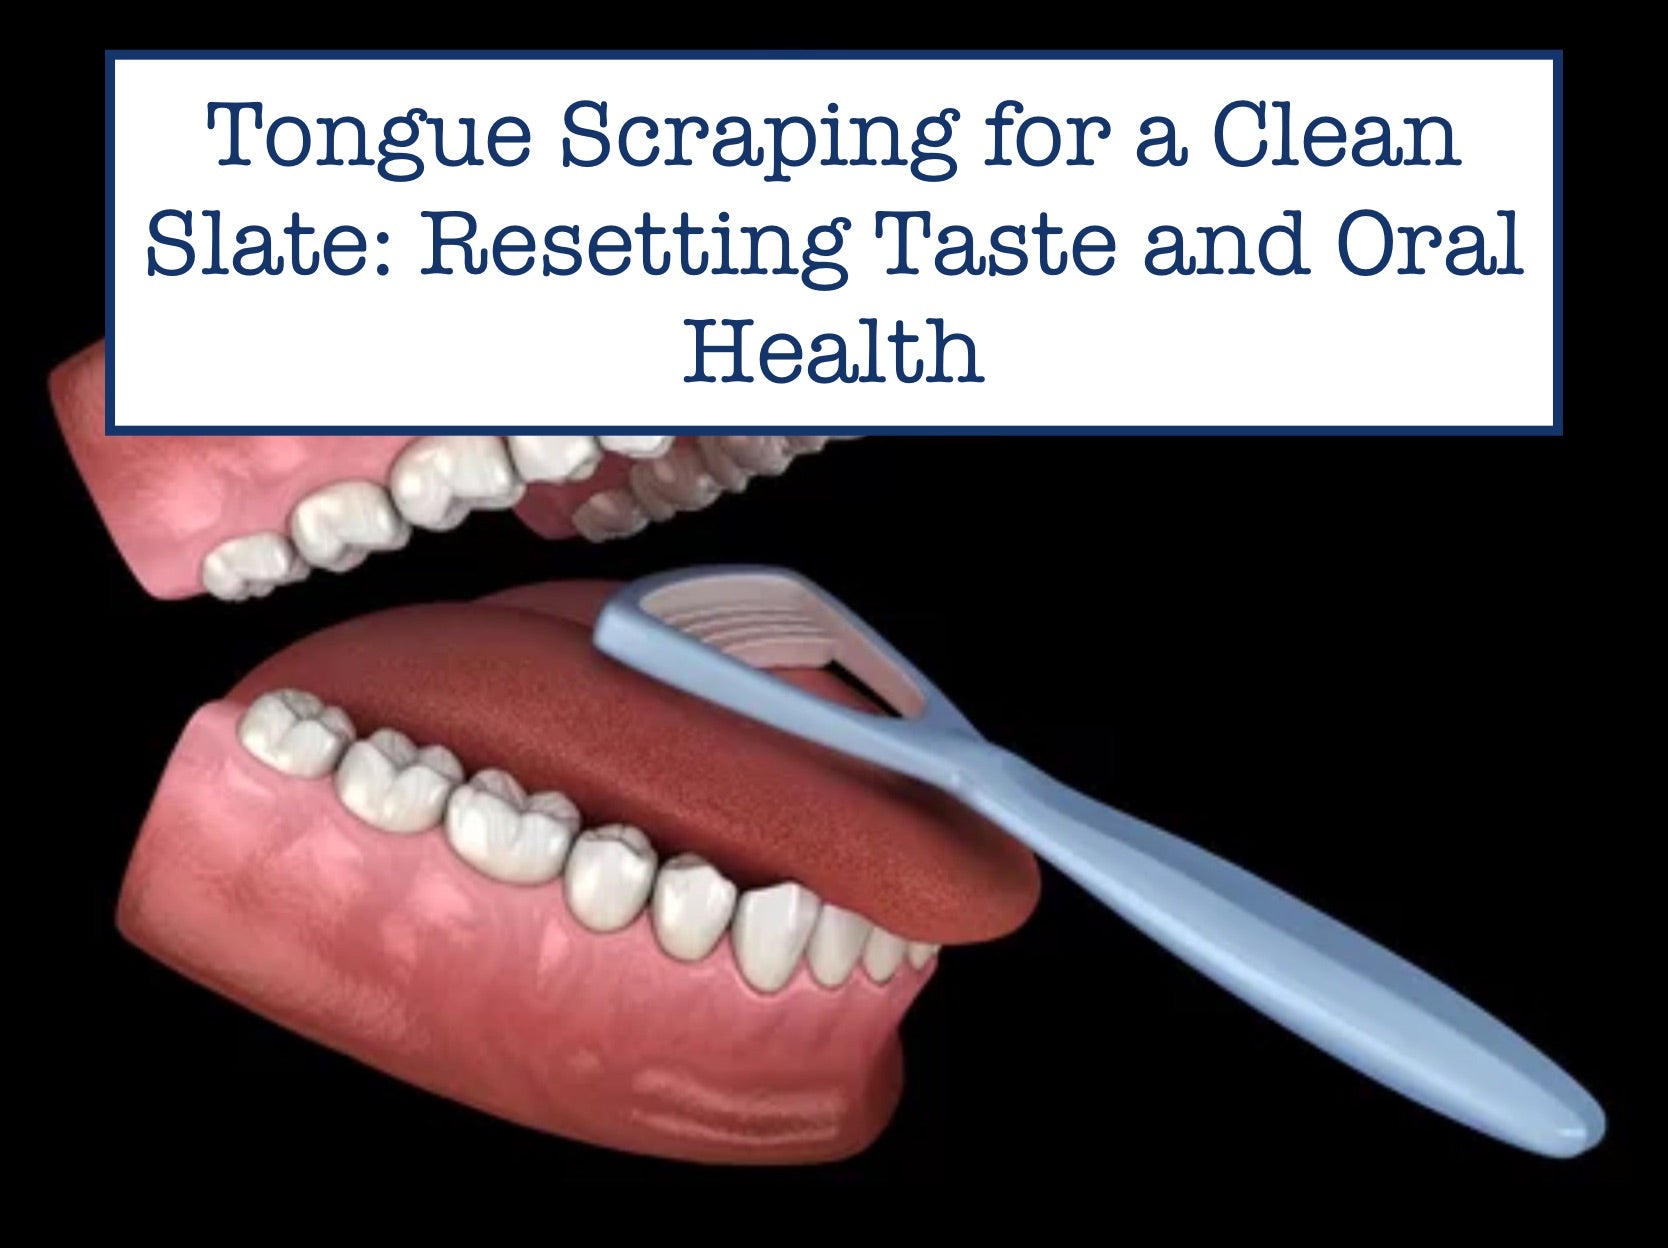 Tongue Scraping for a Clean Slate: Resetting Taste and Oral Health